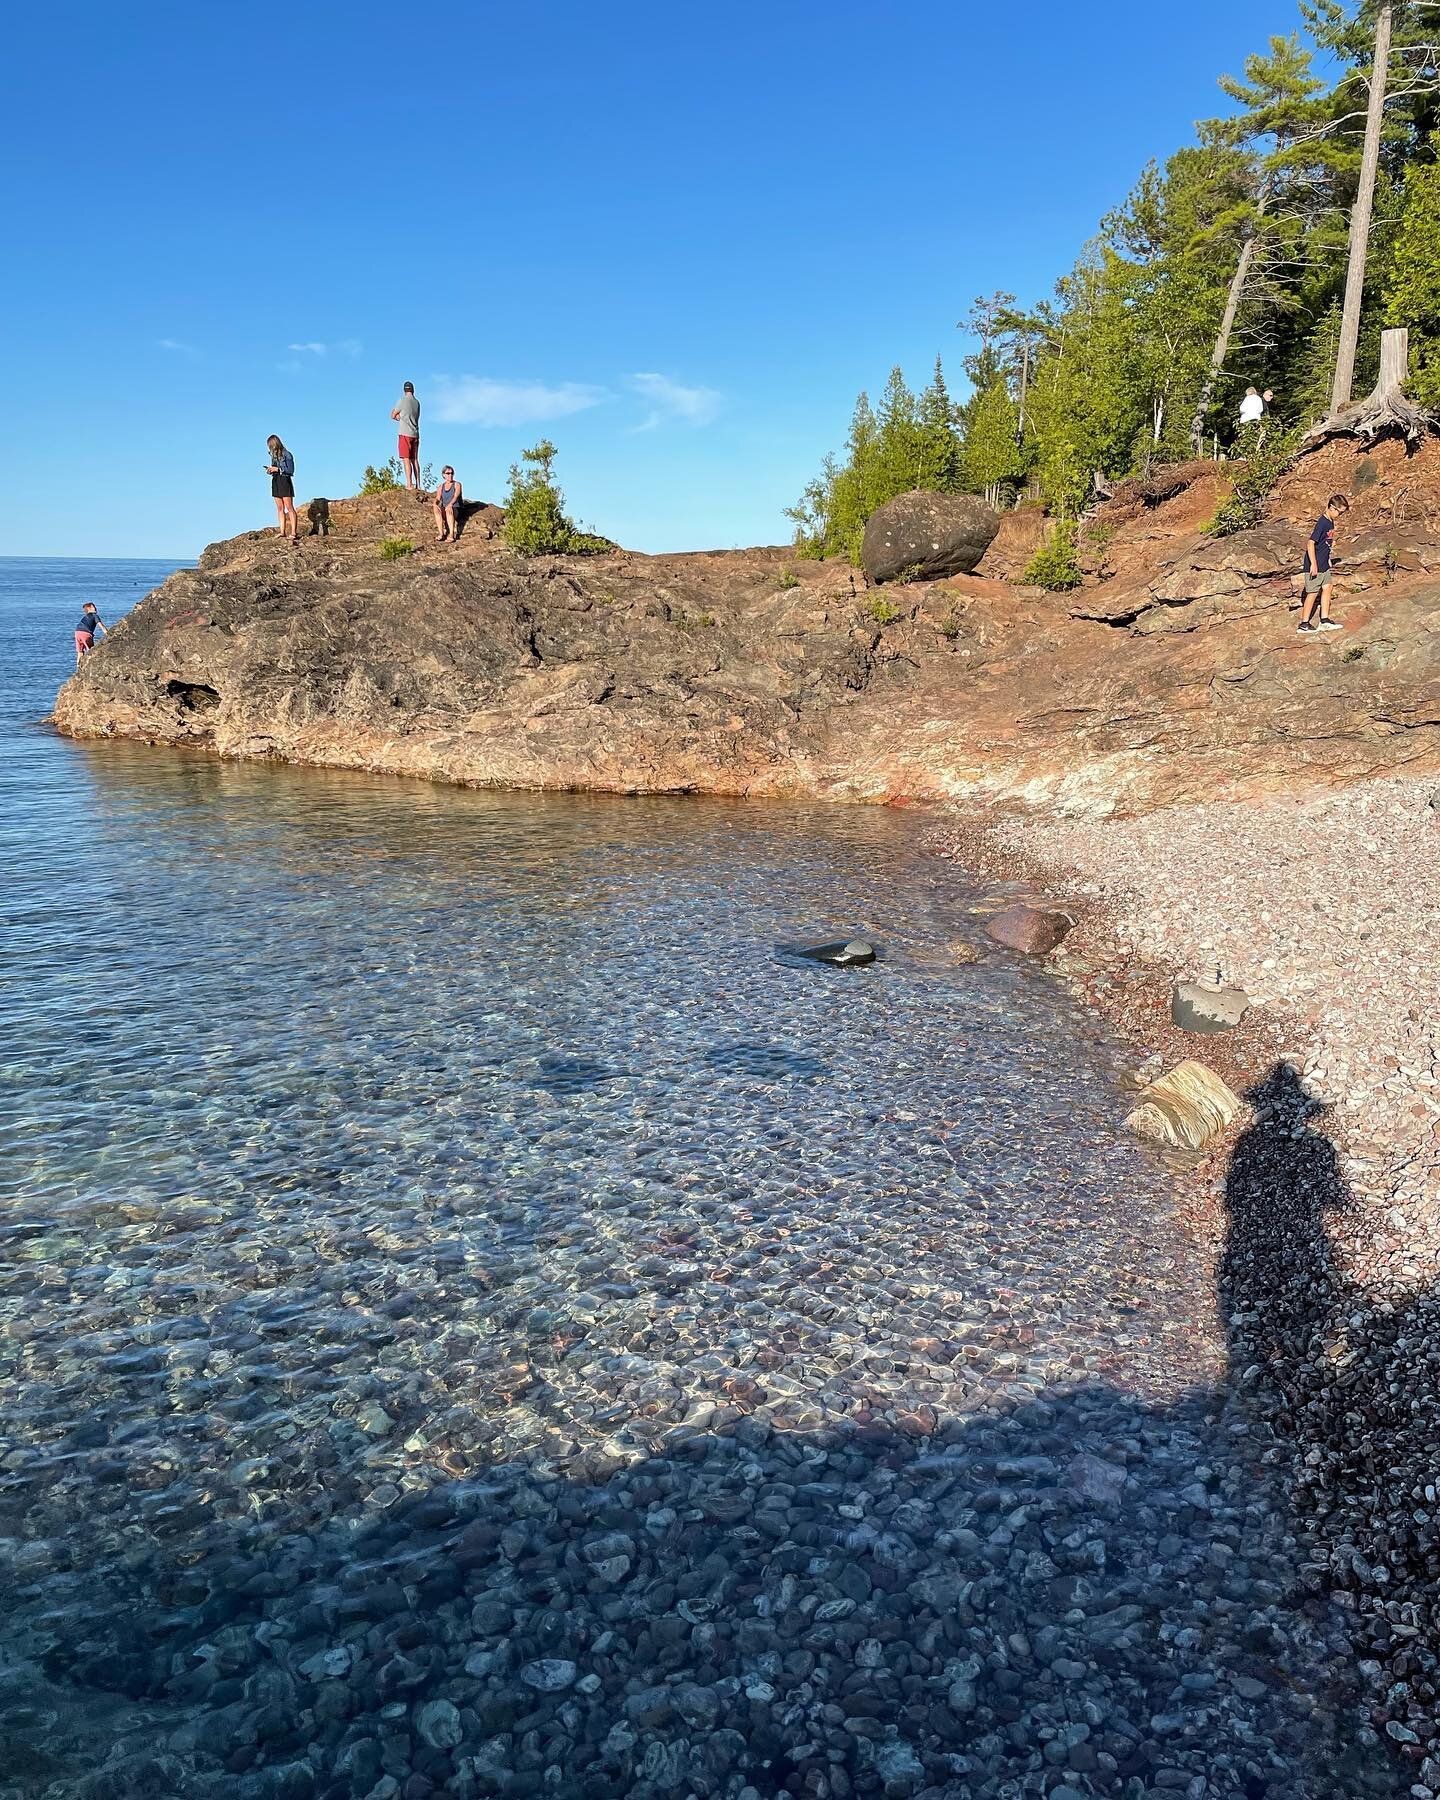 A few last glimpses of Lake Superior before we head inland and away from the Greats&hellip;for now.
Also: beard buddies, and Yooper Pride.
#adventuresinbliss #lakesuperior #greatlakes #laketour #lordfairybear #11weeks #marquettemichigan #blackrocks #